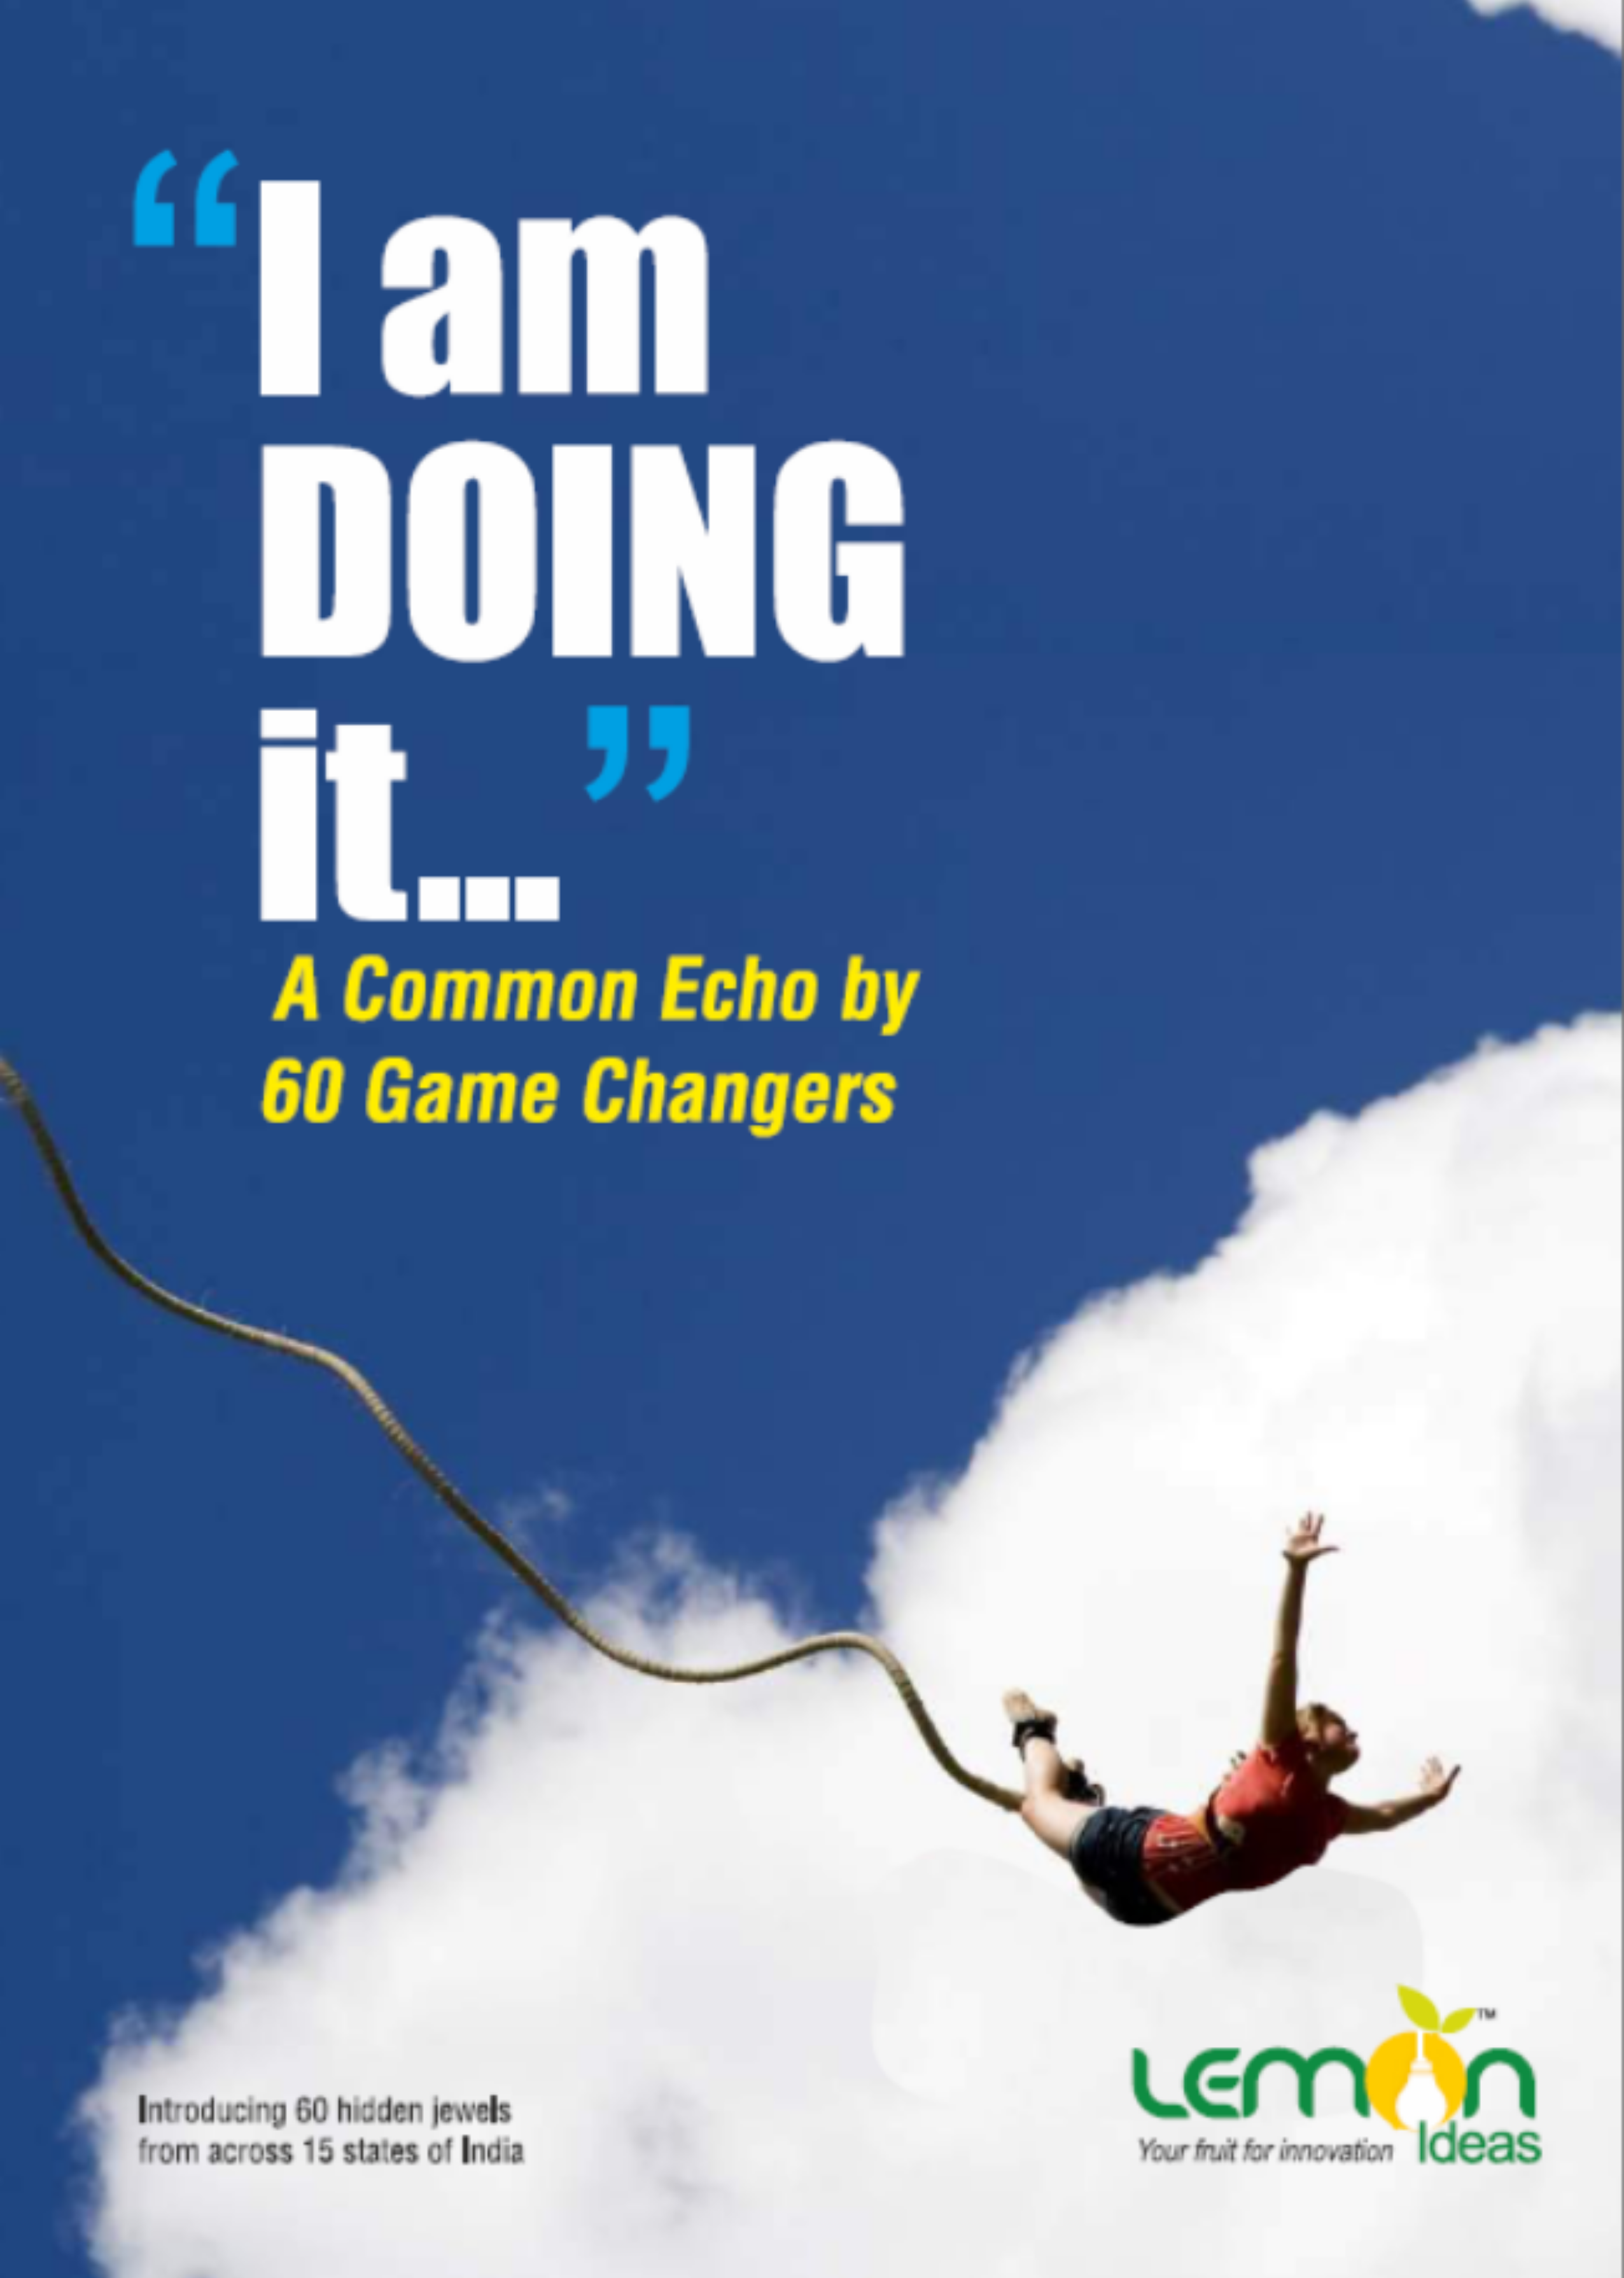 I am doing it..A common echo by 60 Game Changers publication